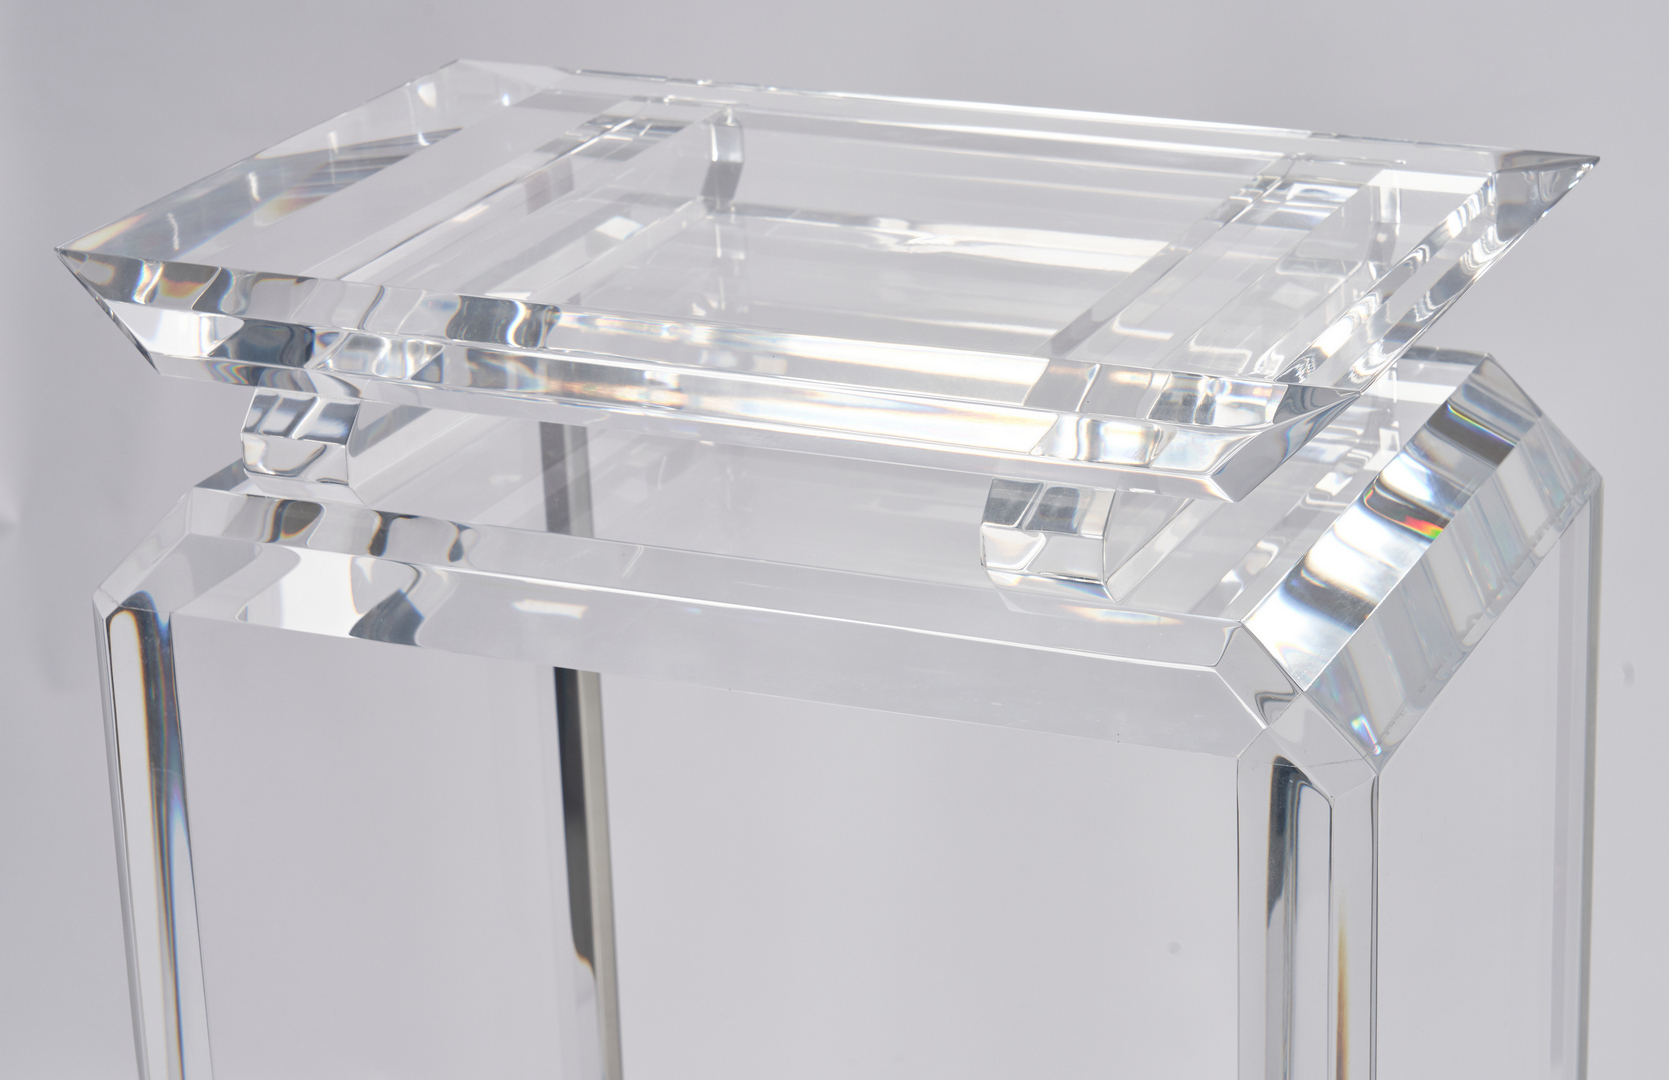 Lot 512: 3 Acrylic or Lucite Pedestals